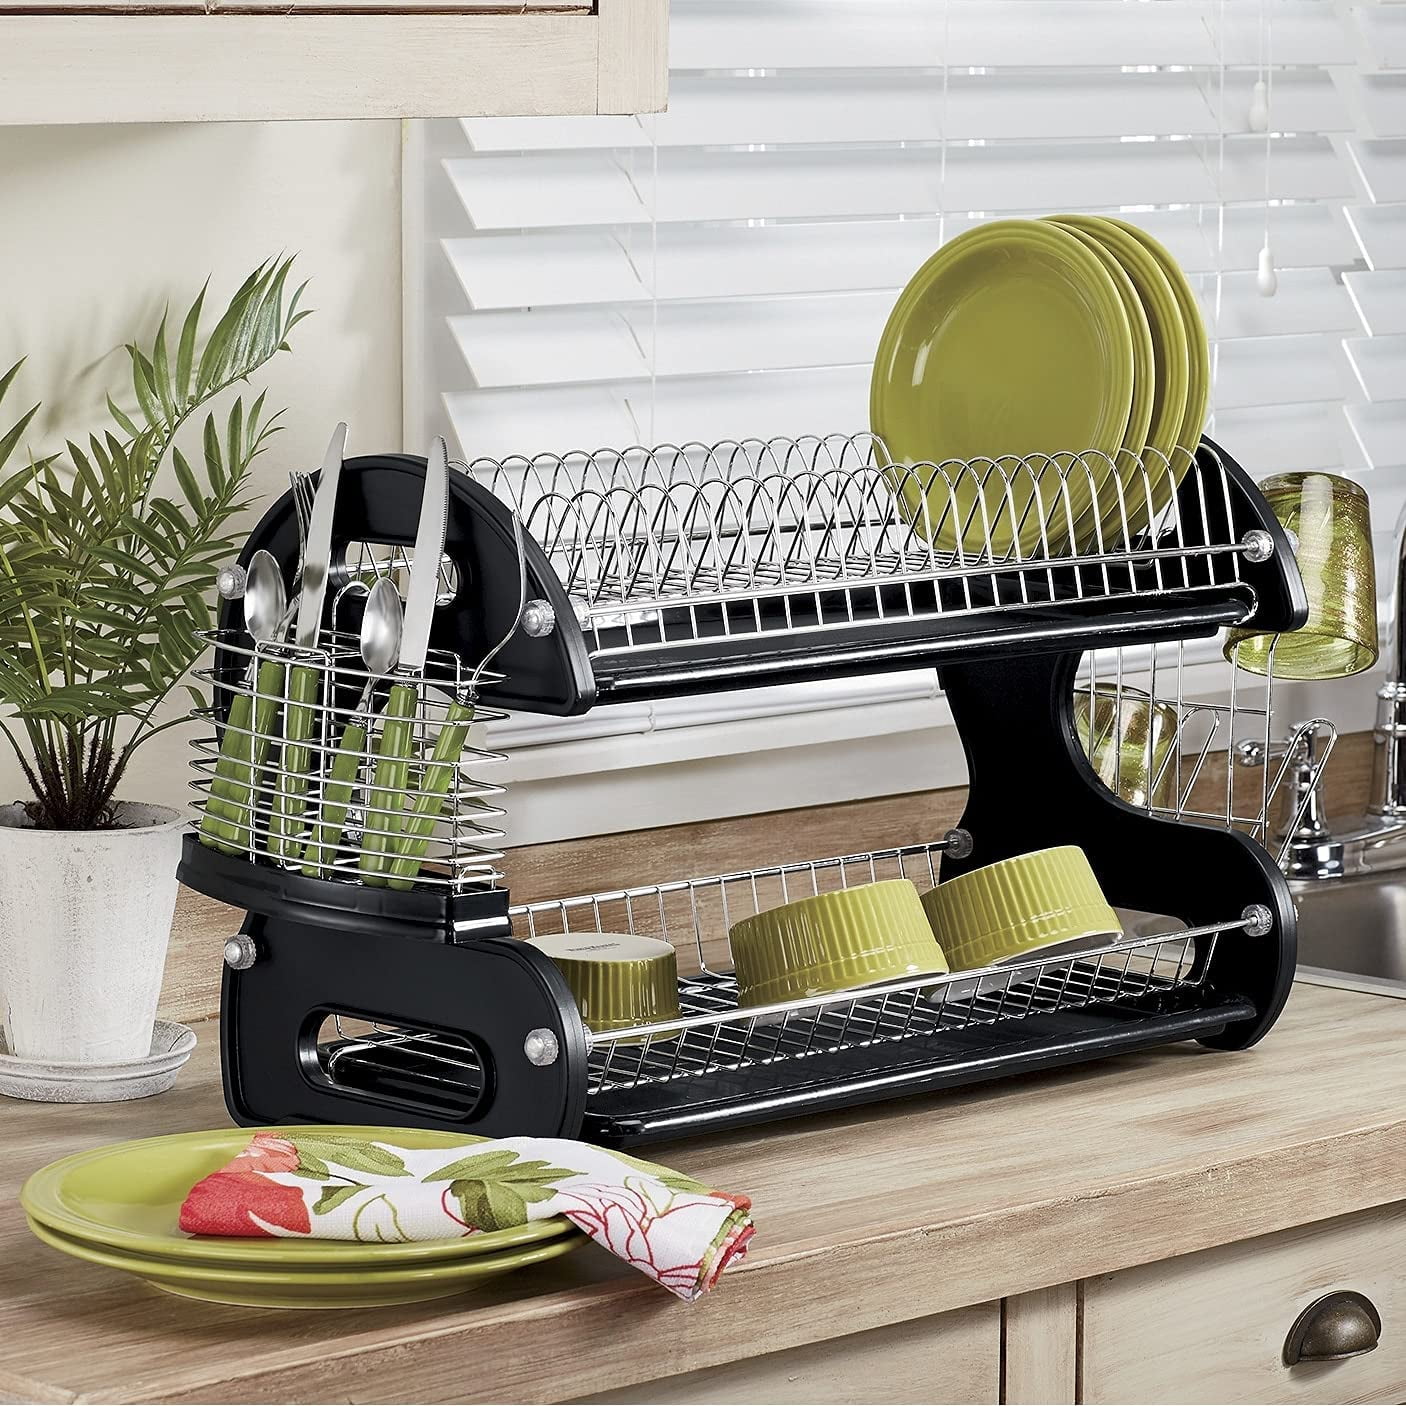 Kingrack Dish Drying Rack,2-Tier Dish Rack and Drainboard Set with